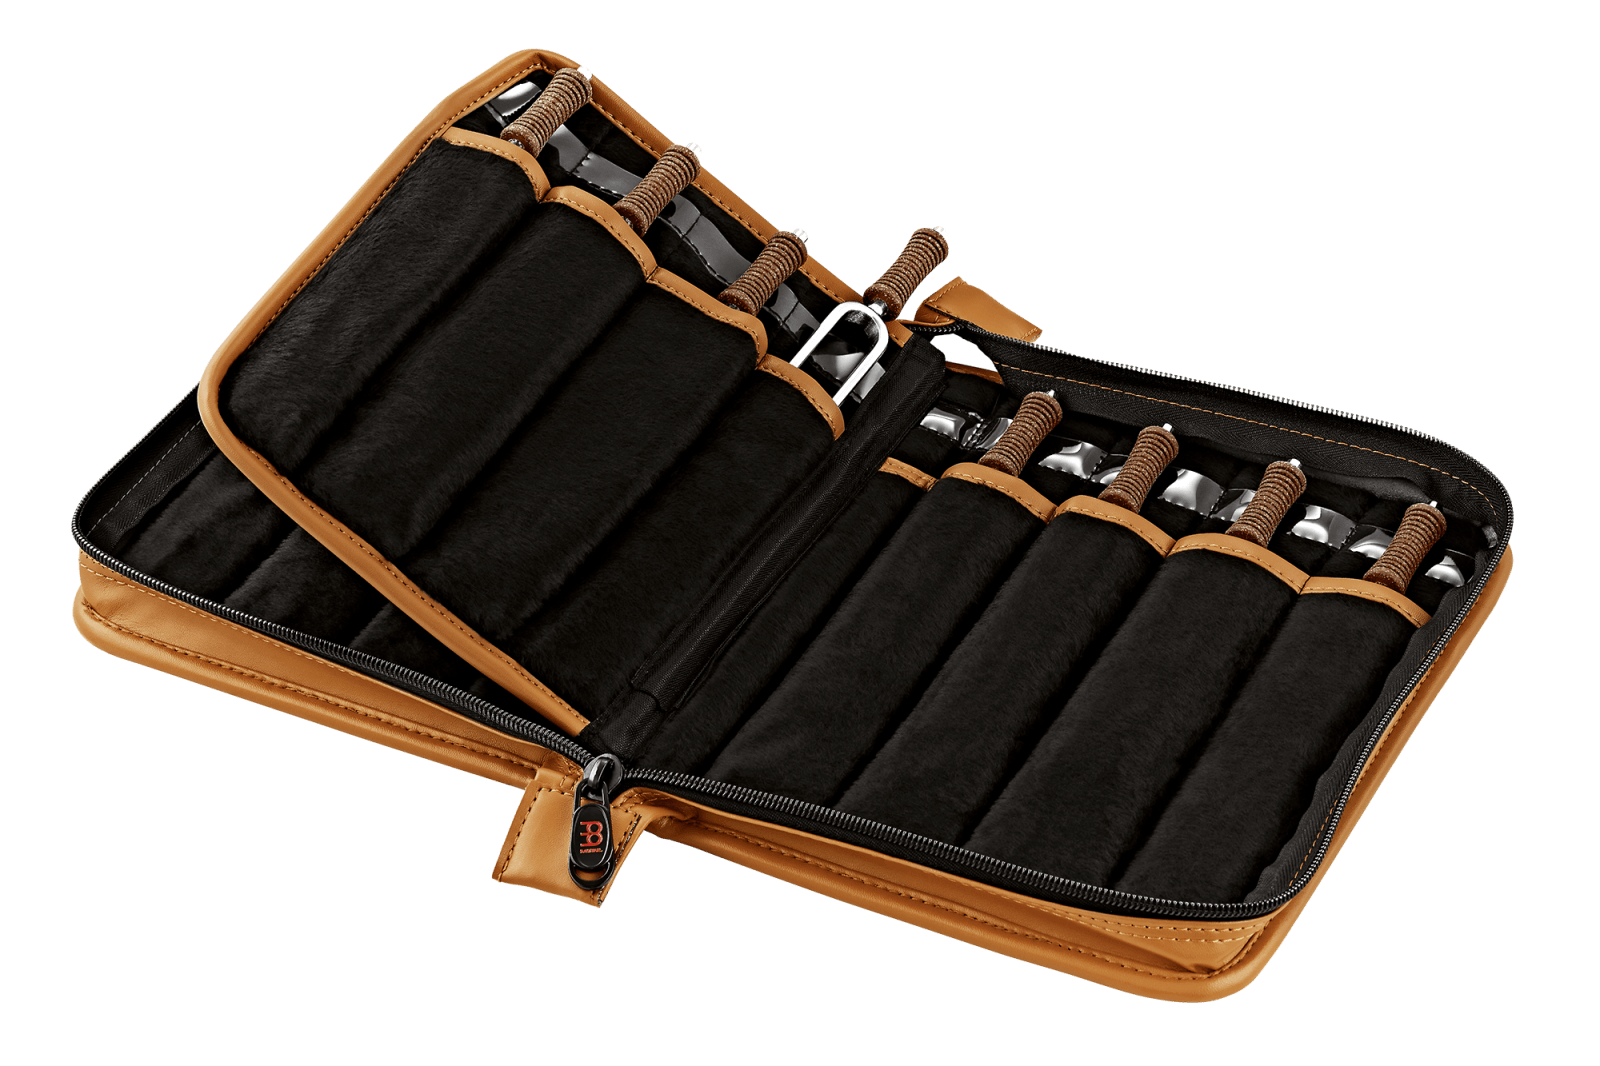 Planetary Tuned Tuning Fork Set of 16 With a Leather Case - Planetary Tuned Tuning Forks